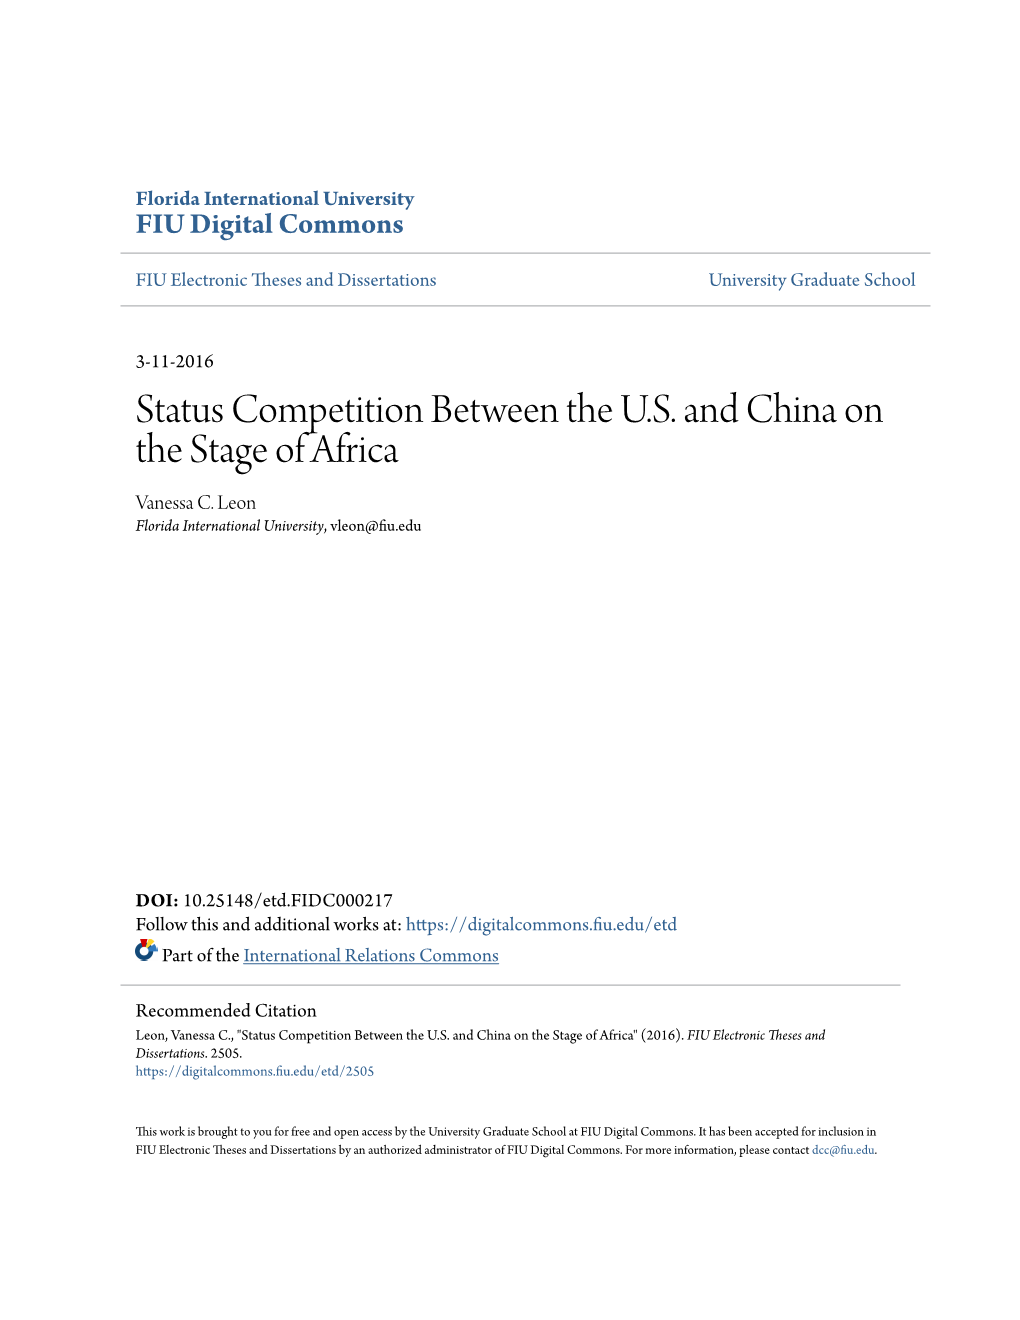 Status Competition Between the U.S. and China on the Stage of Africa Vanessa C